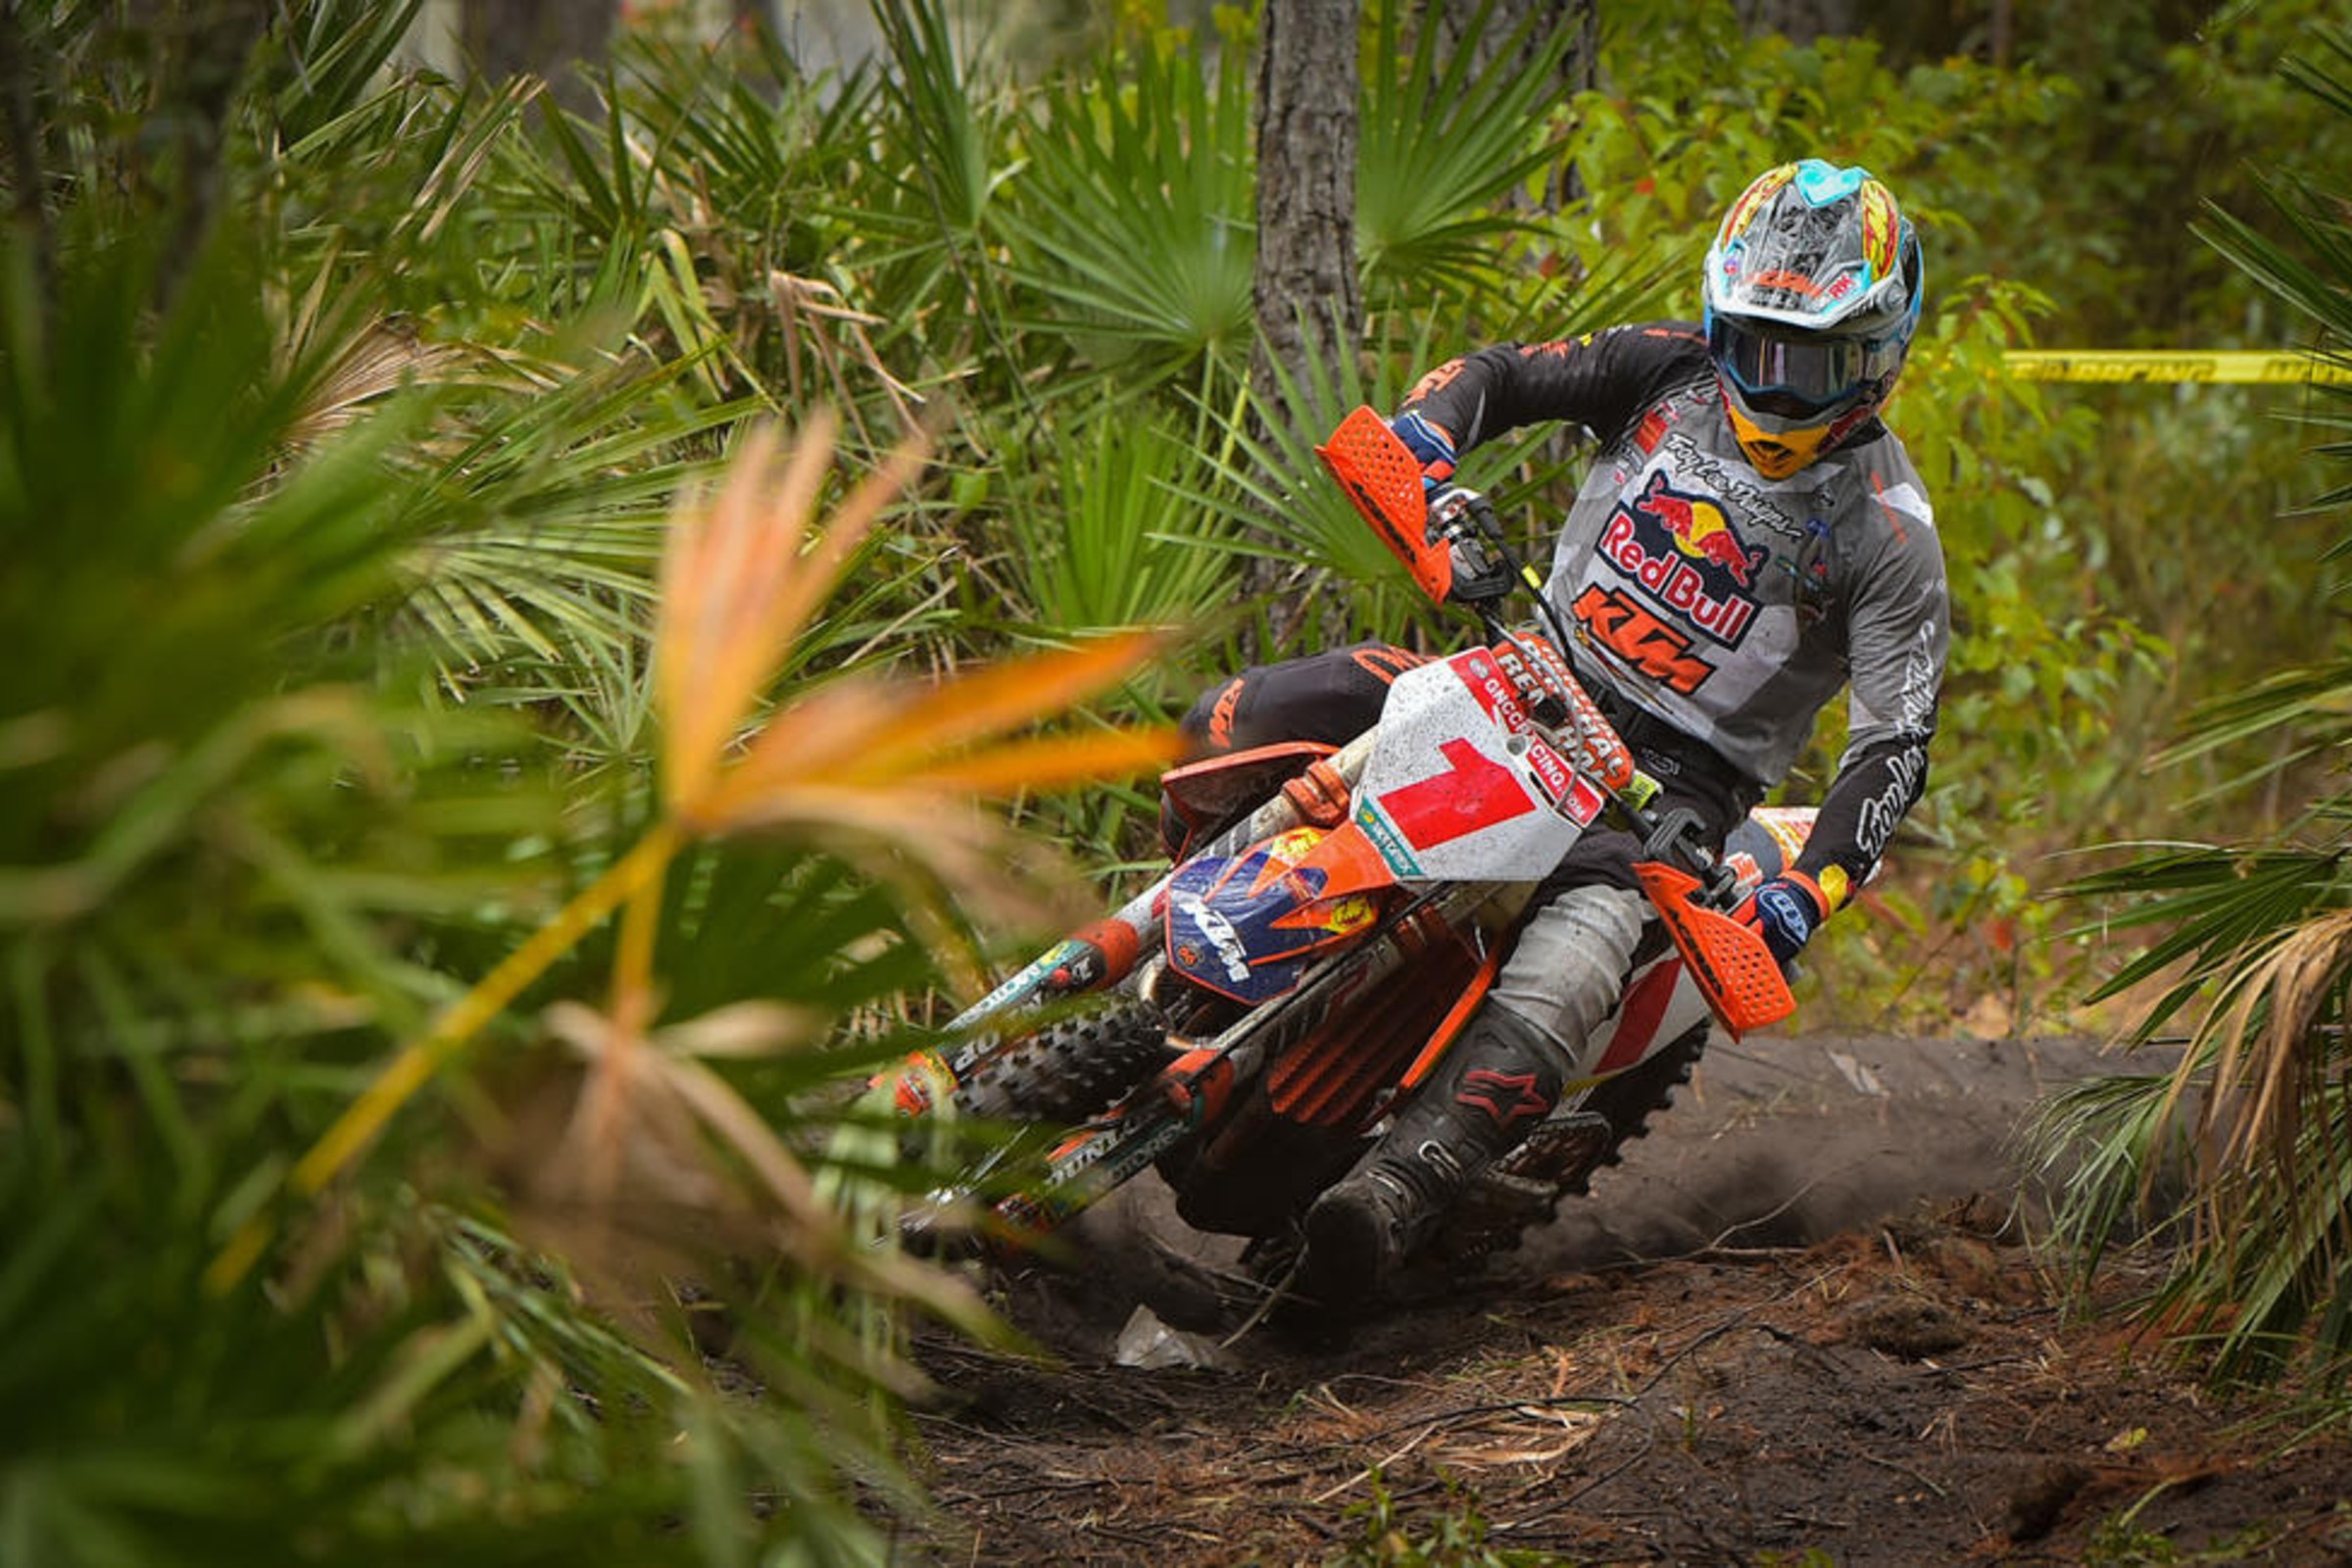 Kailub Russell Captures Second Straight Win At Wild Boar Gncc Gncc Racing Racer X